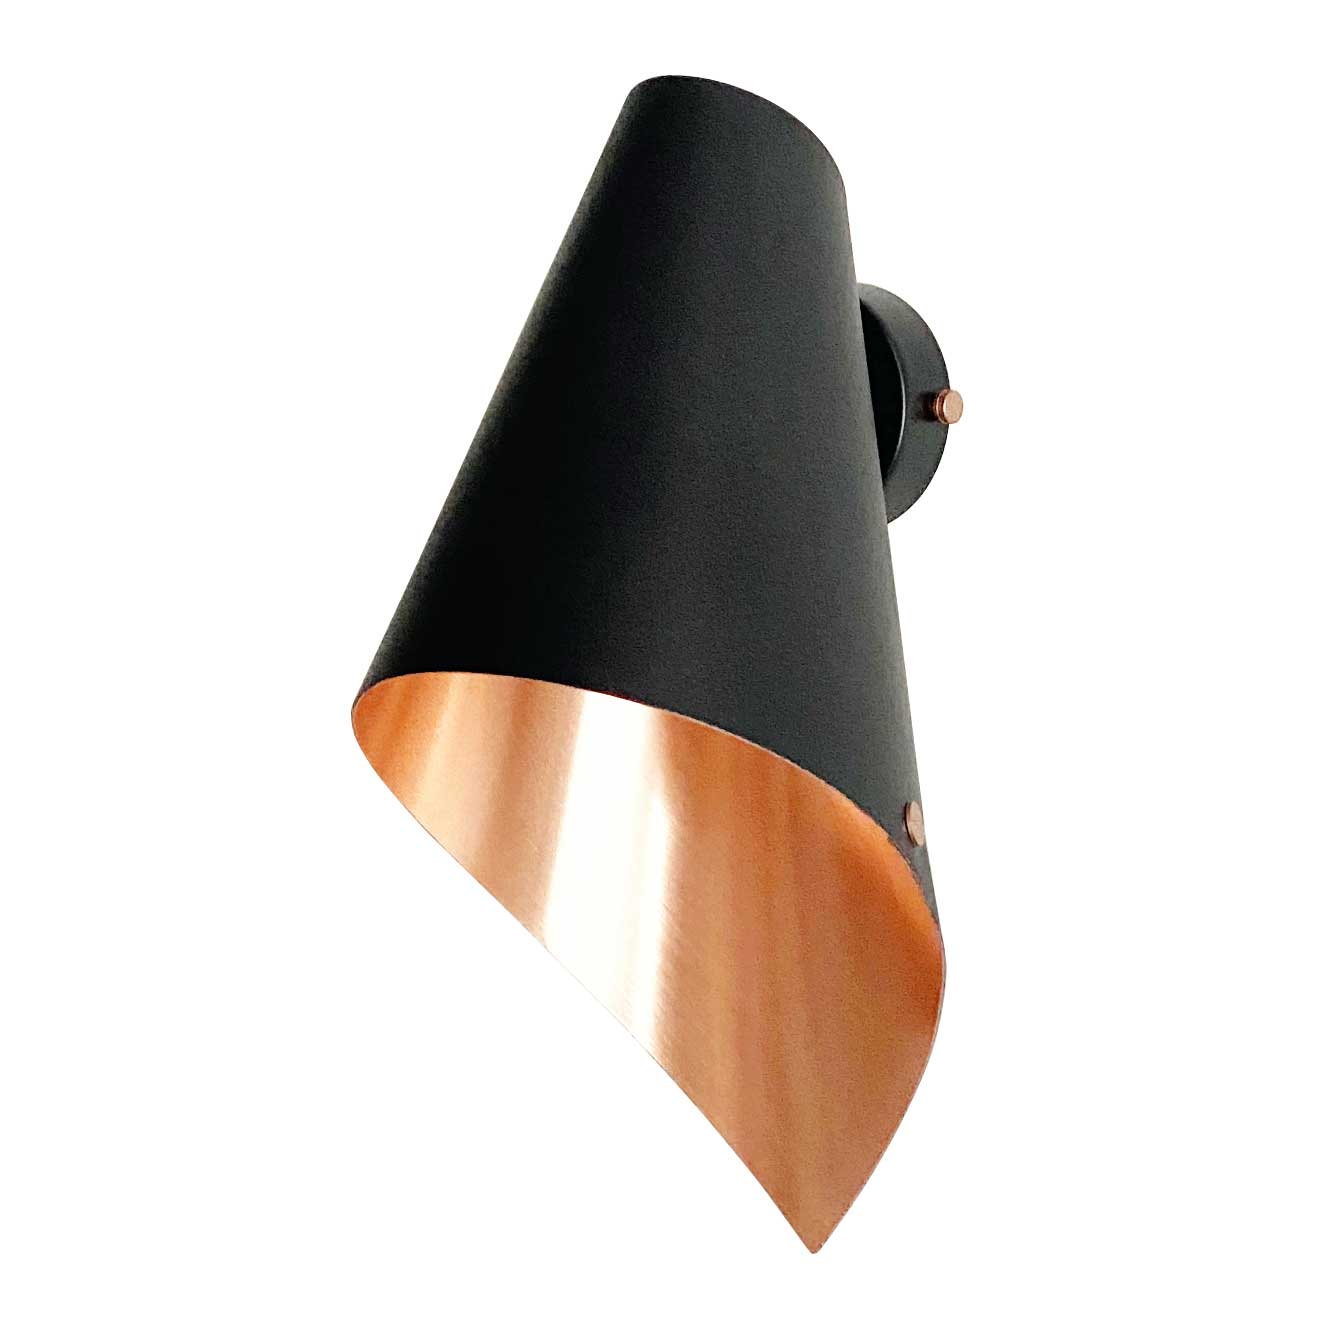 ARCFORM ARC Wall Light in black and brushed copper, supplied by South Charlotte Fine Lighting